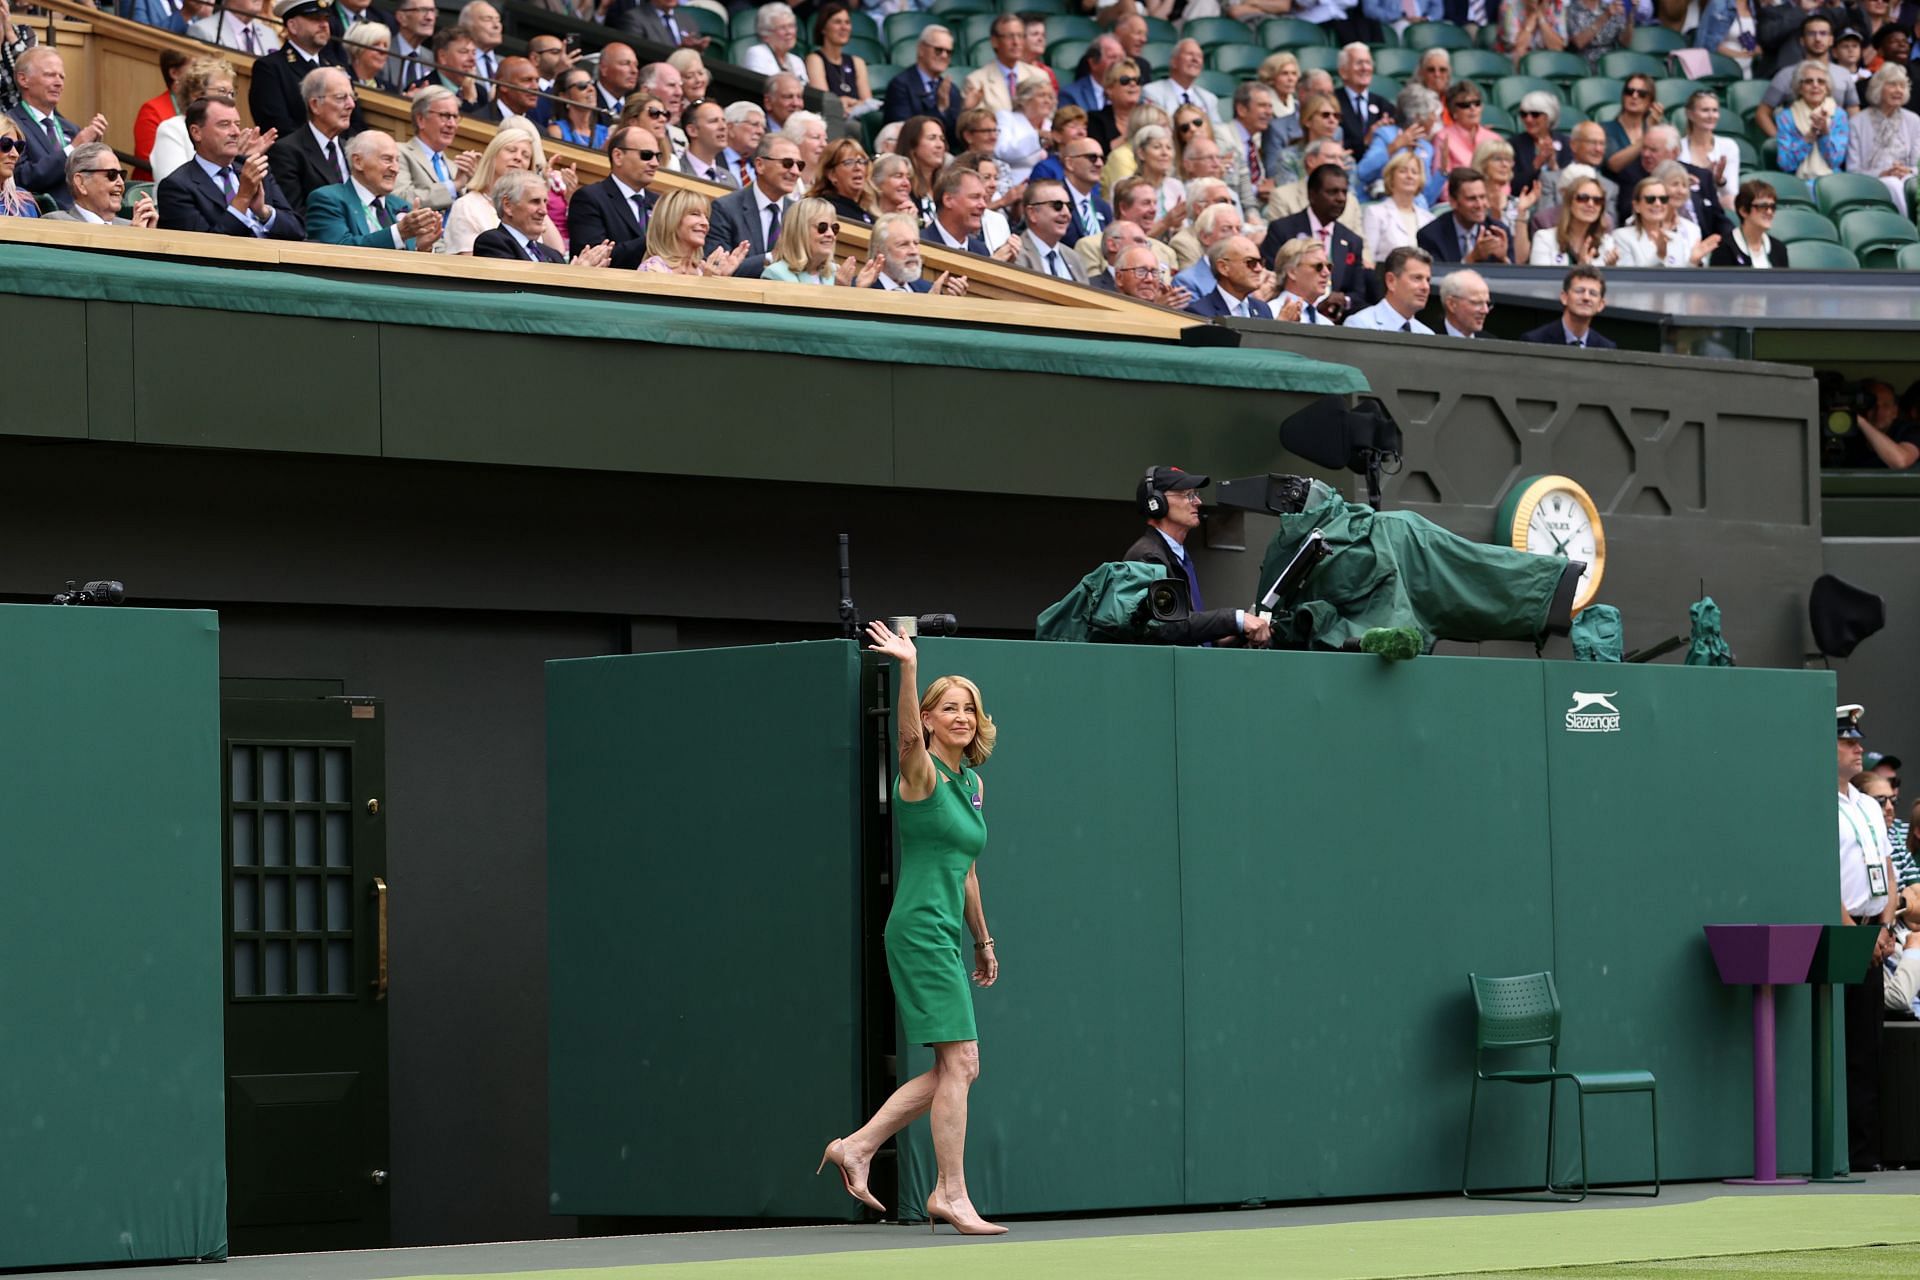 Chris Evert acknowledges spectators at the Centre Court centenary celebration on Day 7 of the Wimbledon Championships 